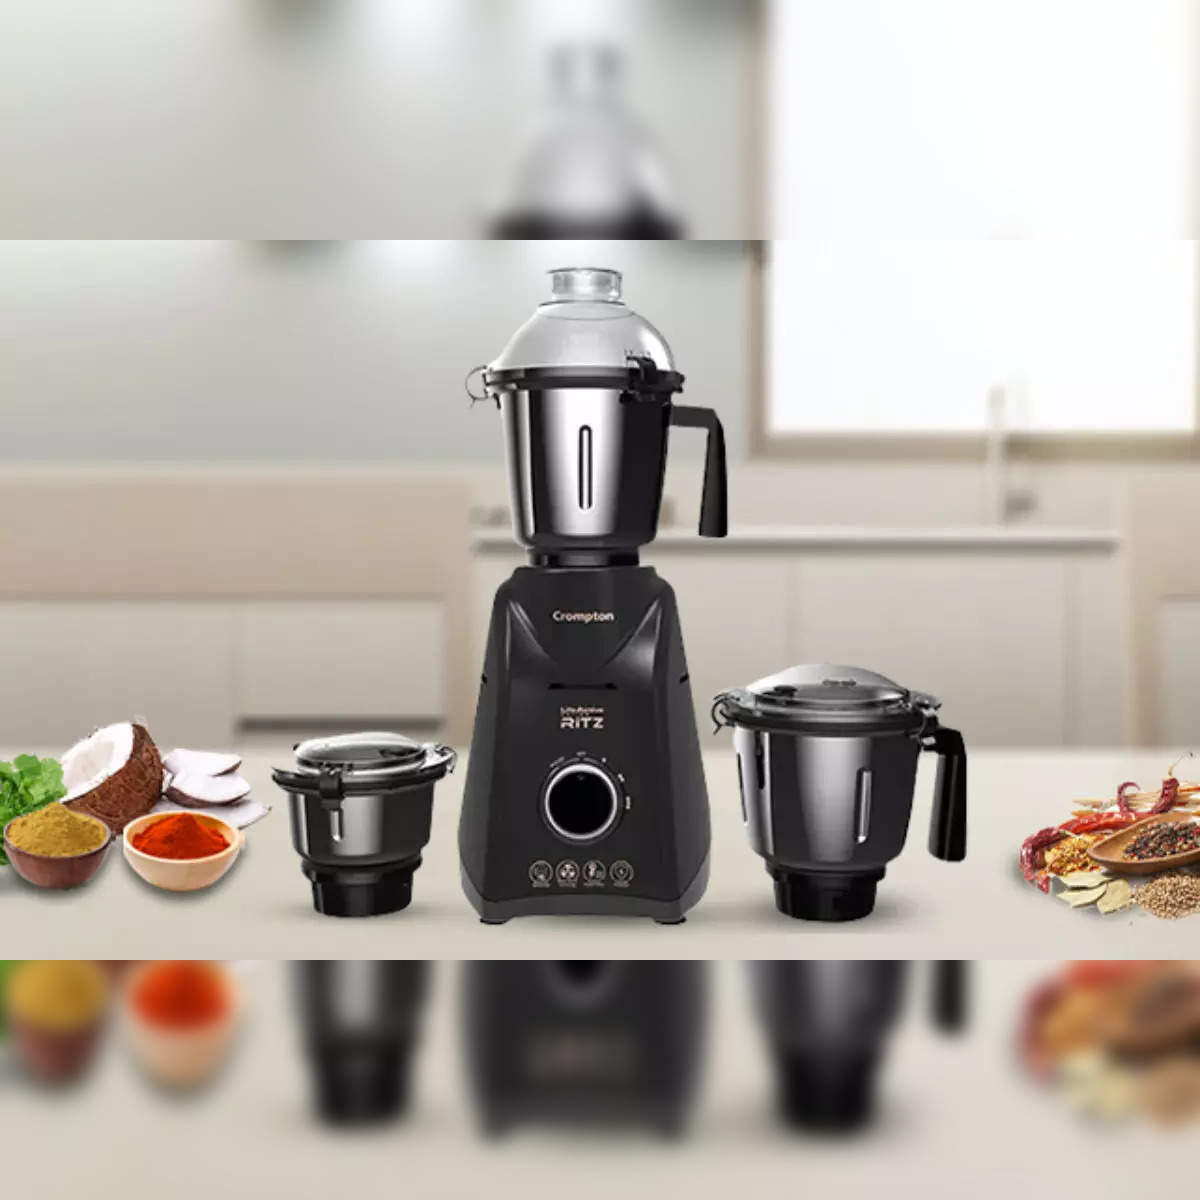 Juicer Mixer Grinder vs Mixer Grinder: Which is Right for You? - Crompton  Greaves Consumer Electricals Limited